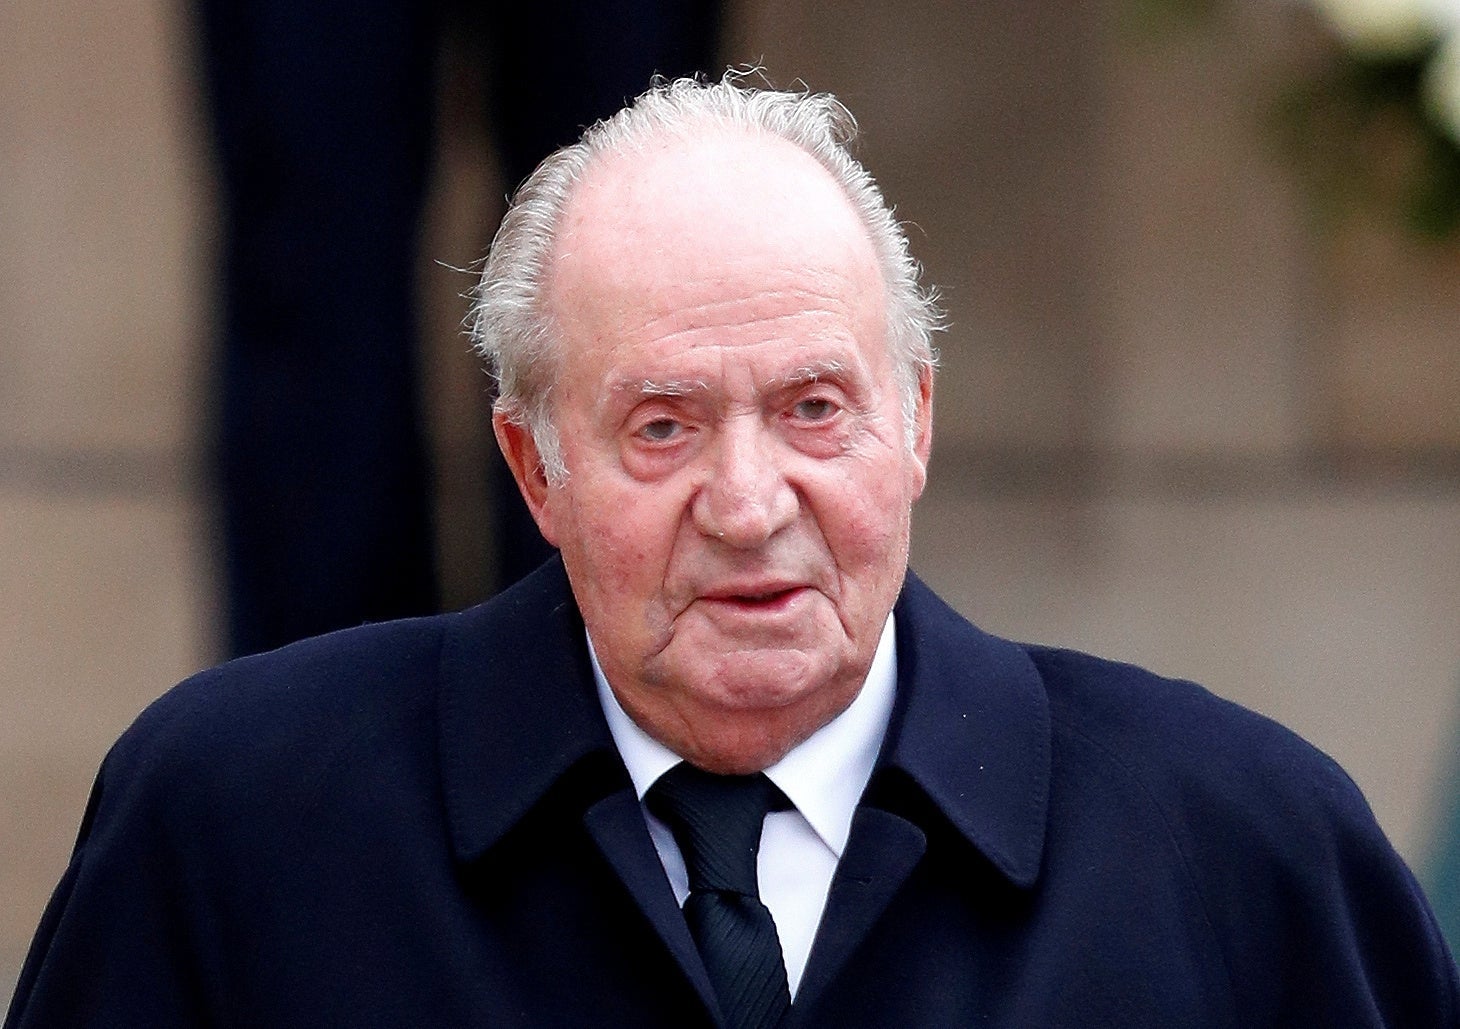 File photo of Spain's former king, Juan Carlos, pictured after attending the funeral ceremony of Luxembourg's Grand Duke Jean at the Notre-Dame Cathedral in Luxembourg in May 2019